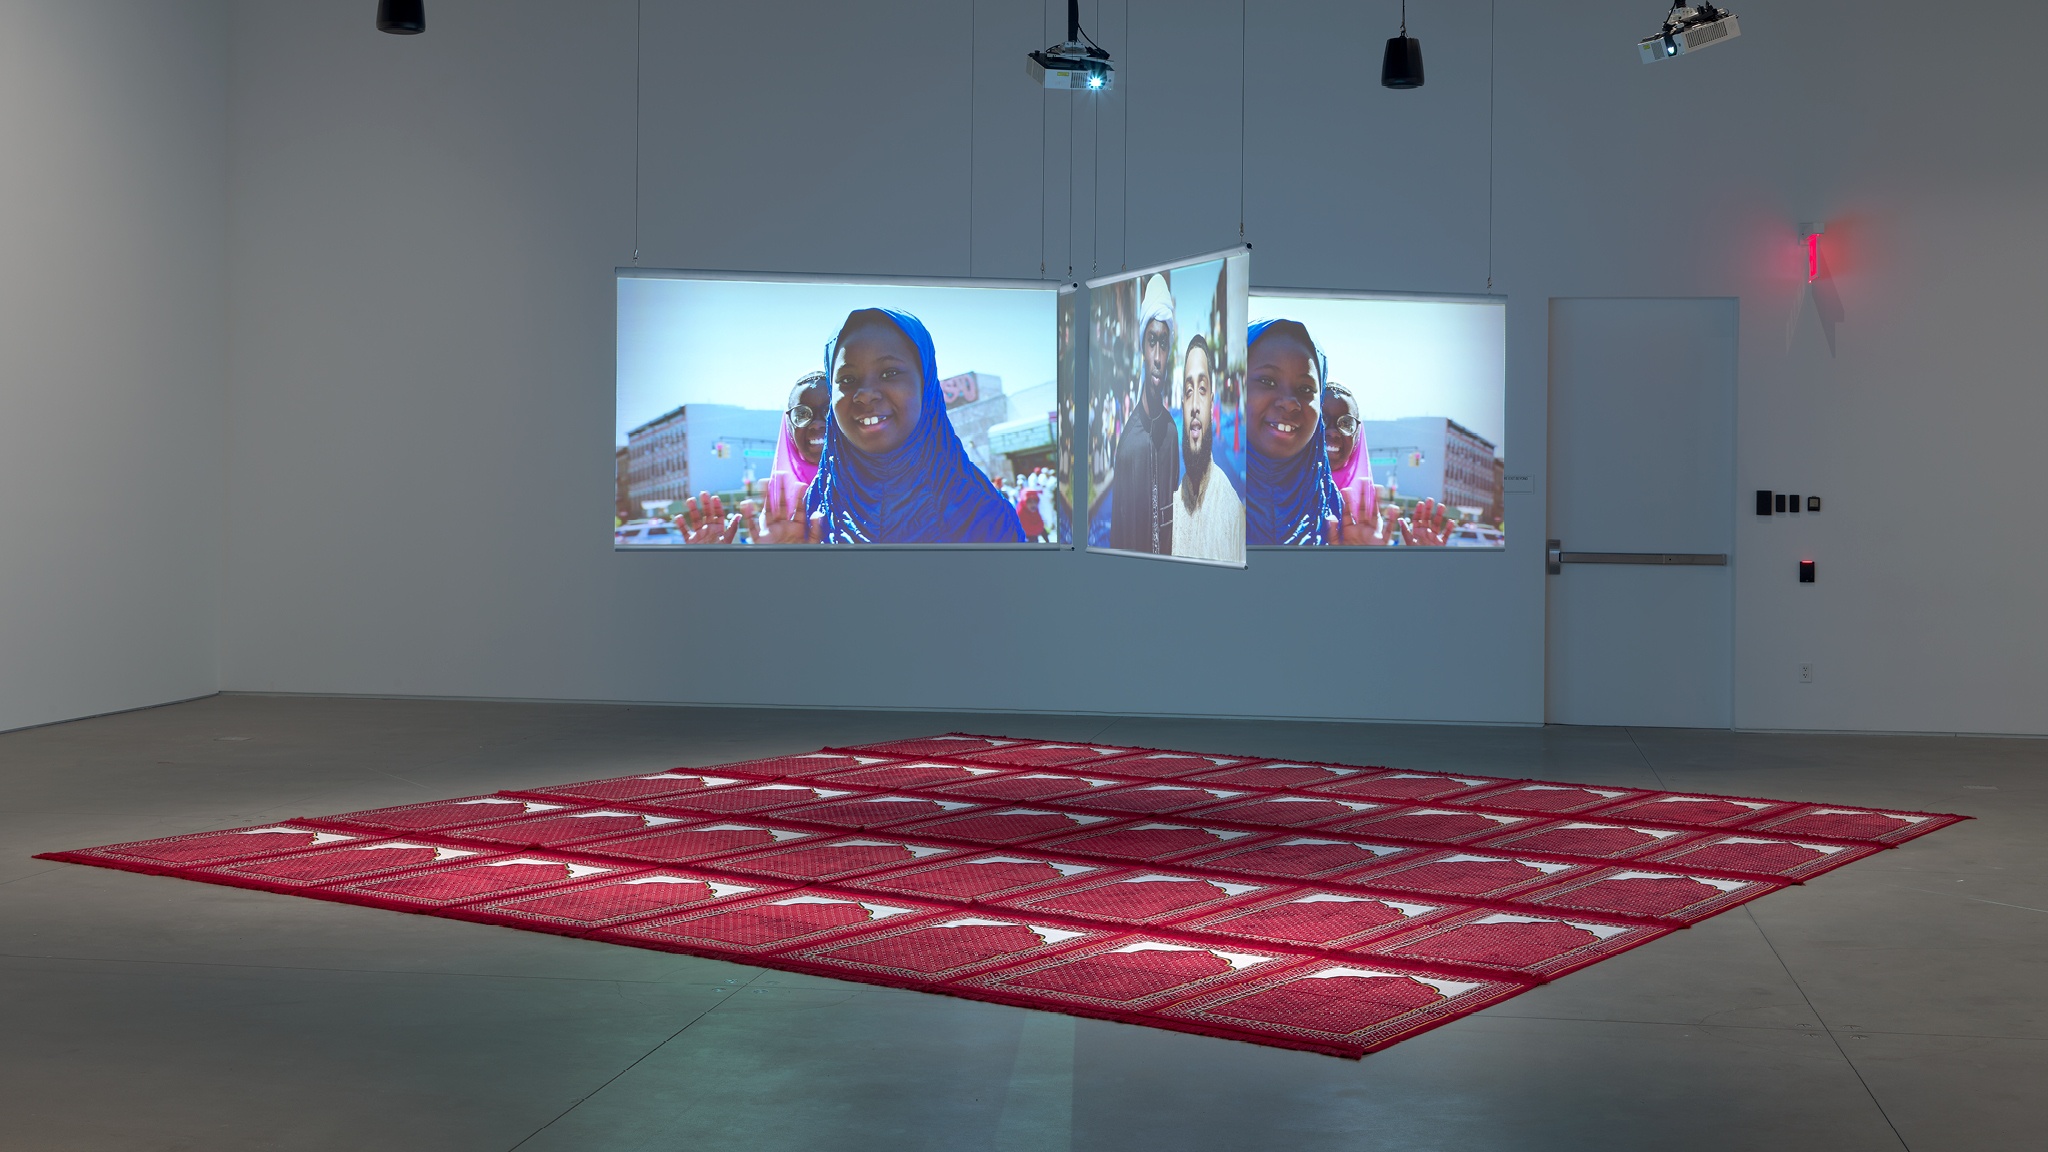 Three video screens suspended in an intersecting formation above a floor covered with red prayer mats placed side by side to form one large square. The screens show a young girl in a headscarf smiling at the camera.